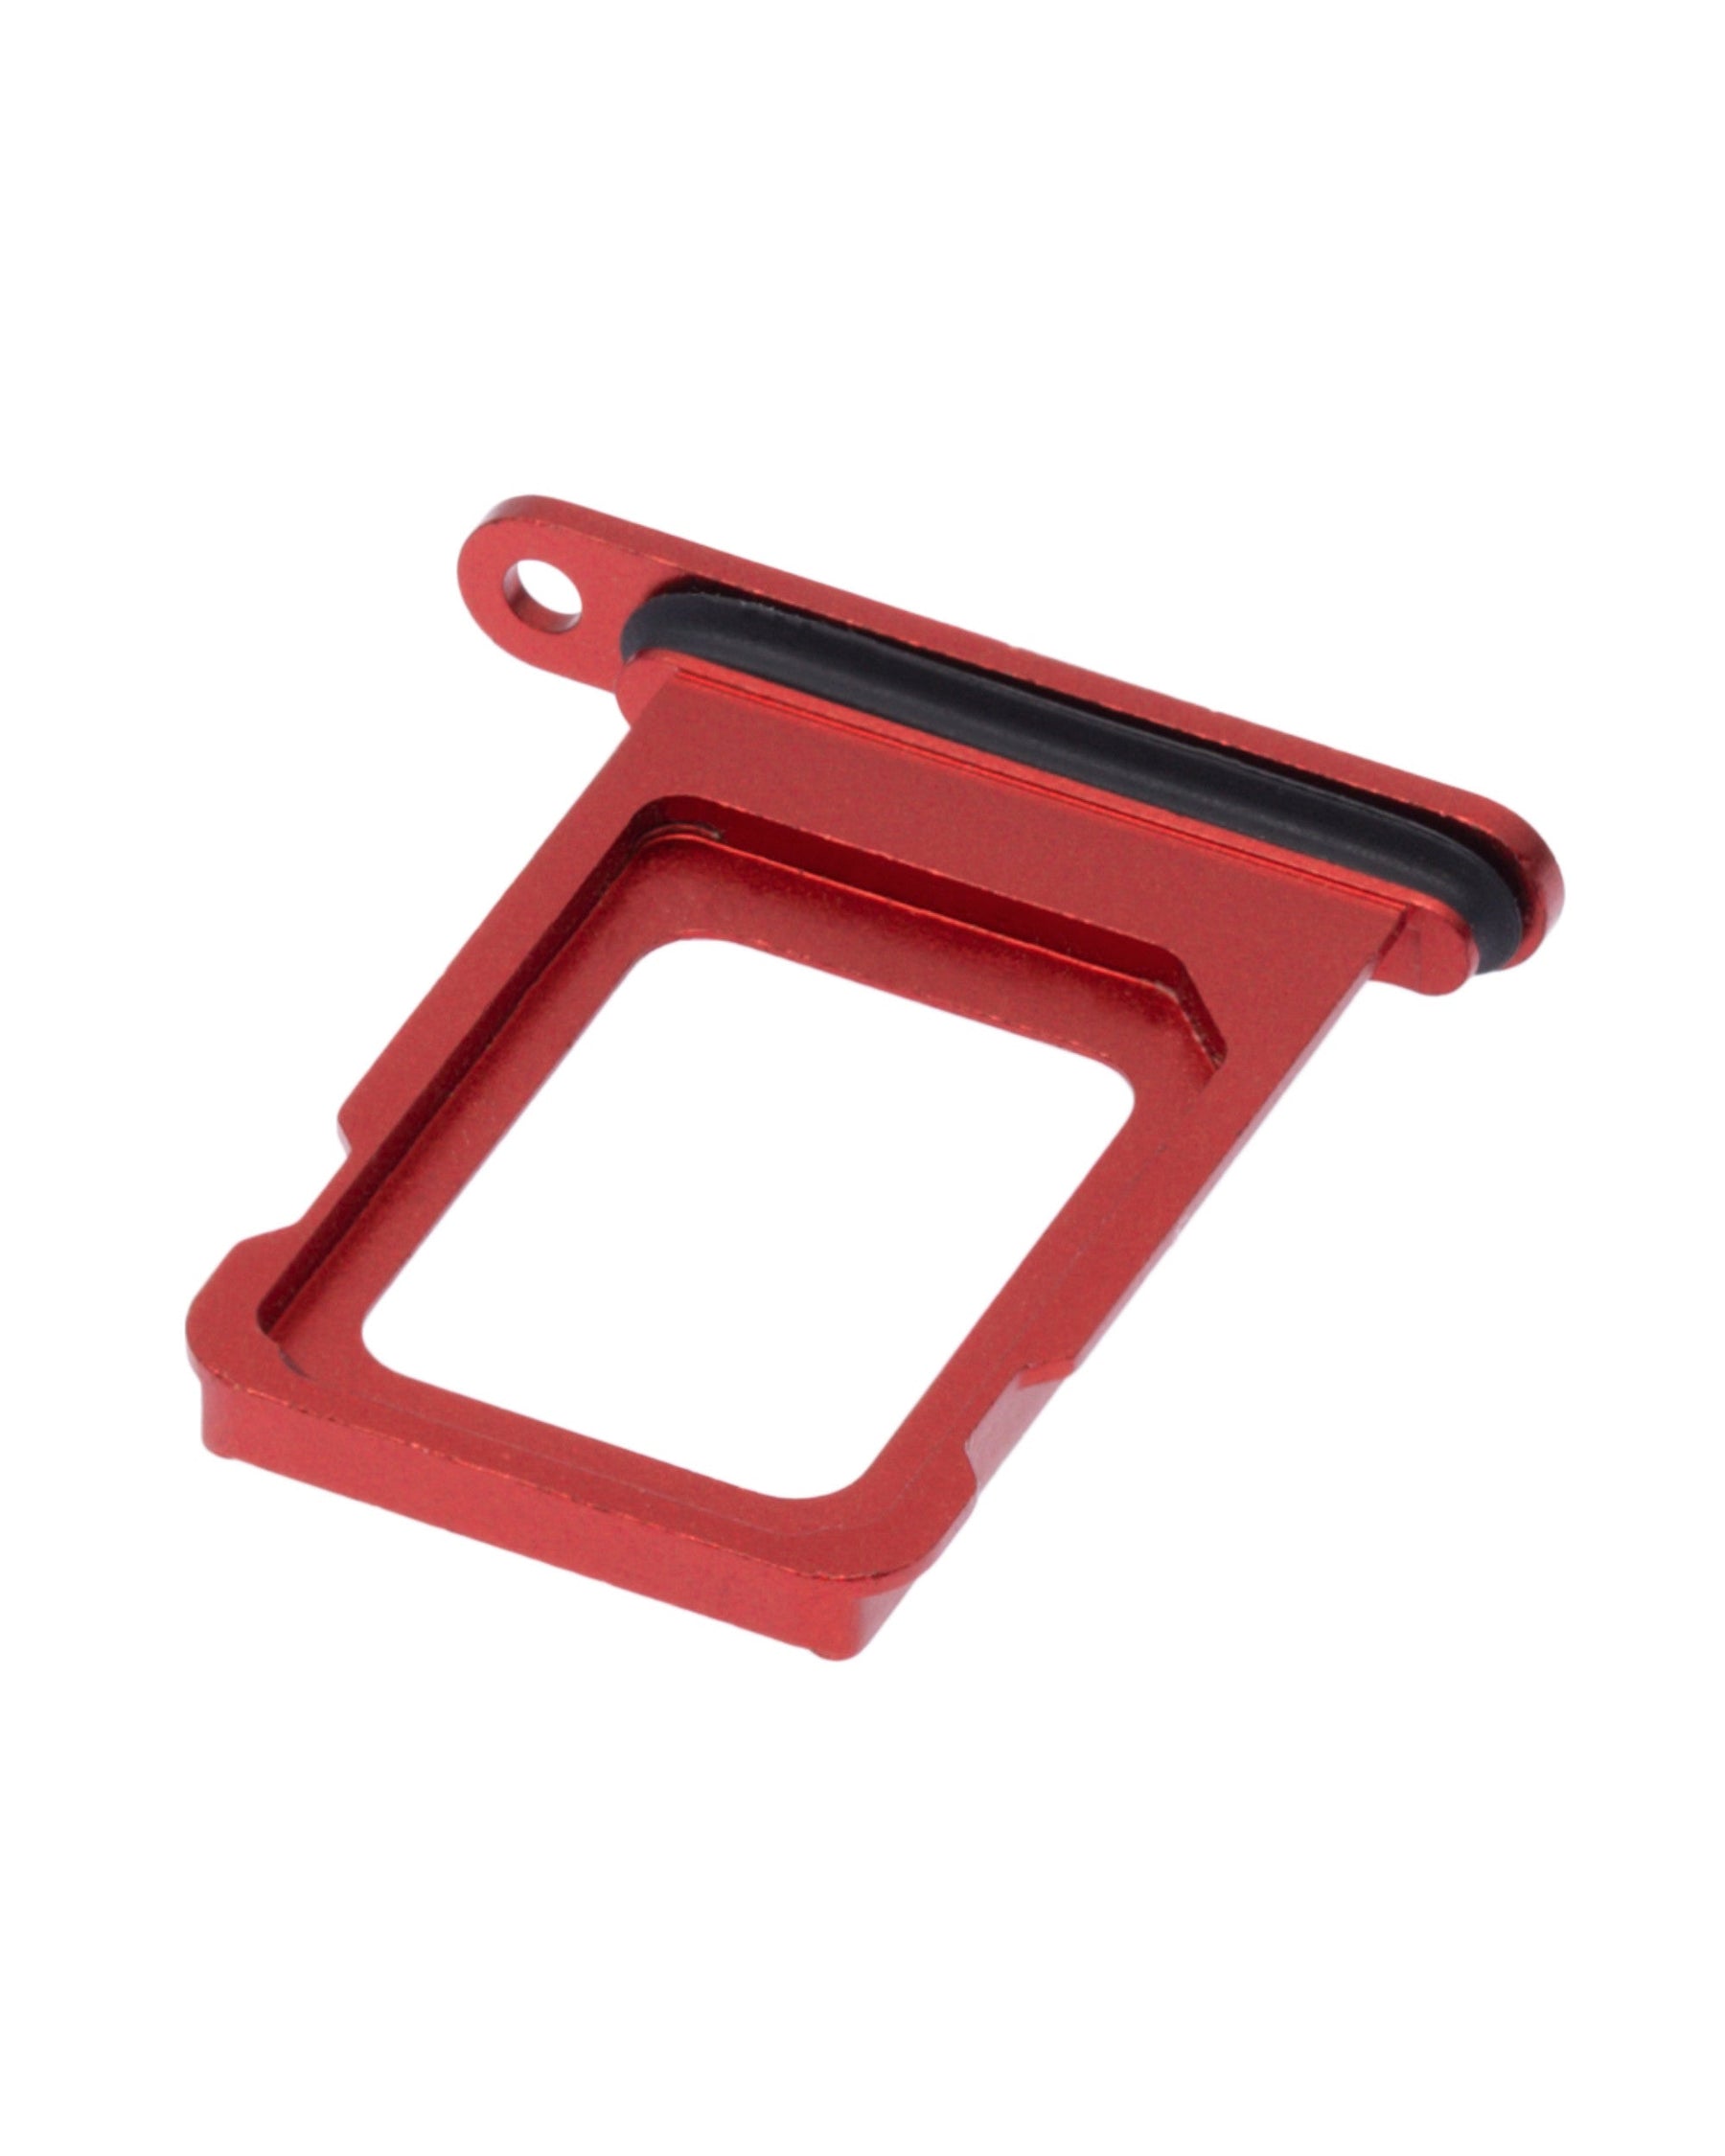 RED DUAL SIM CARD TRAY COMPATIBLE WITH IPHONE 13